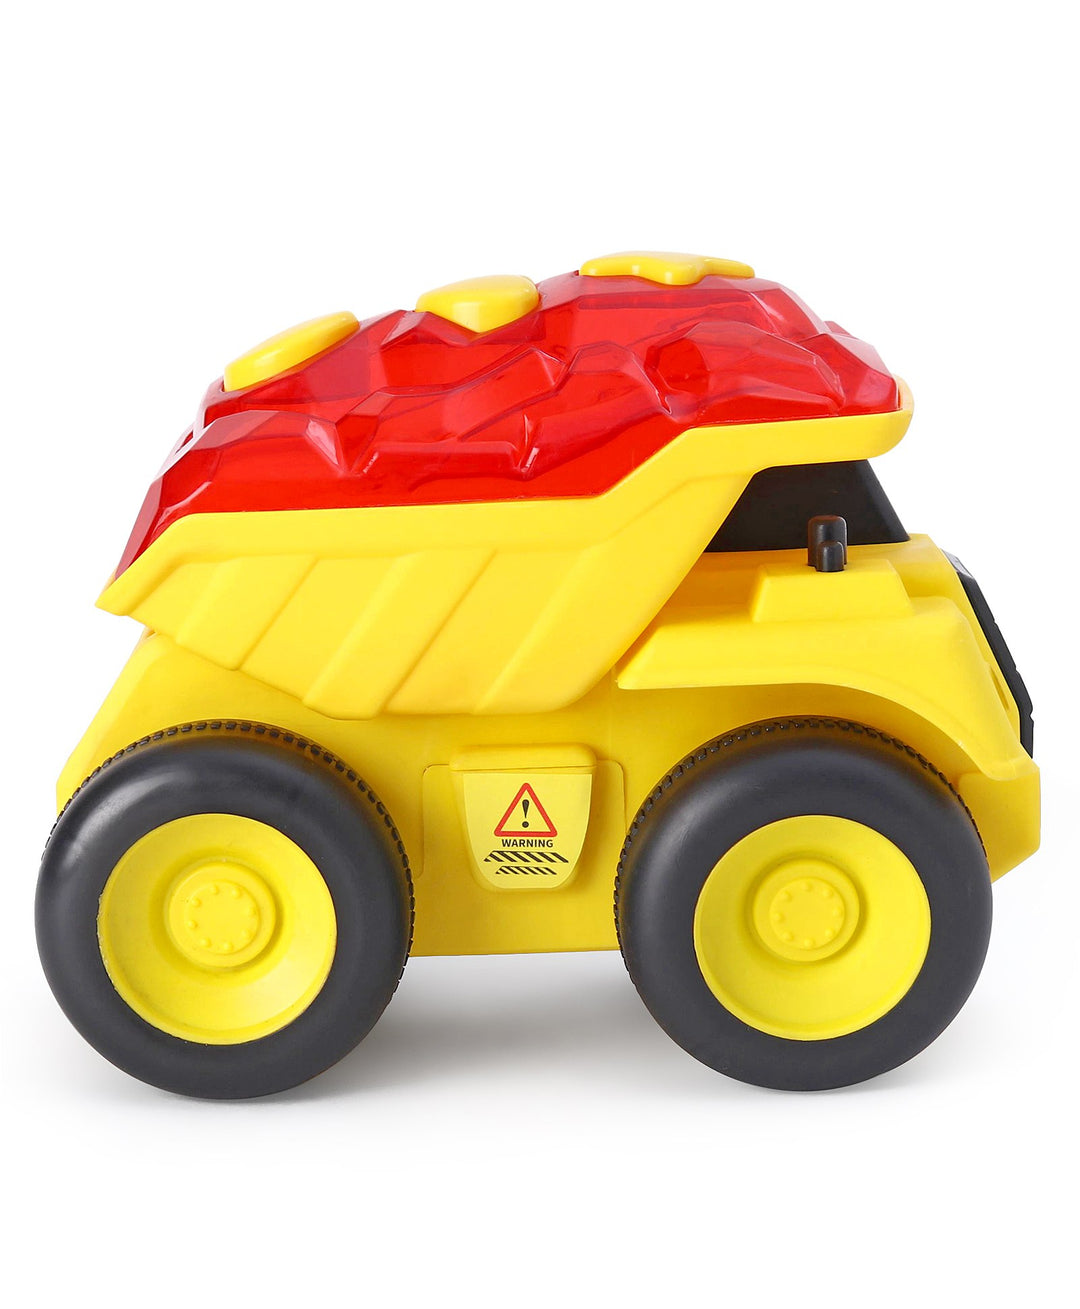 Toyzone King Dumper Truck Push and Go Friction Toy - Yellow